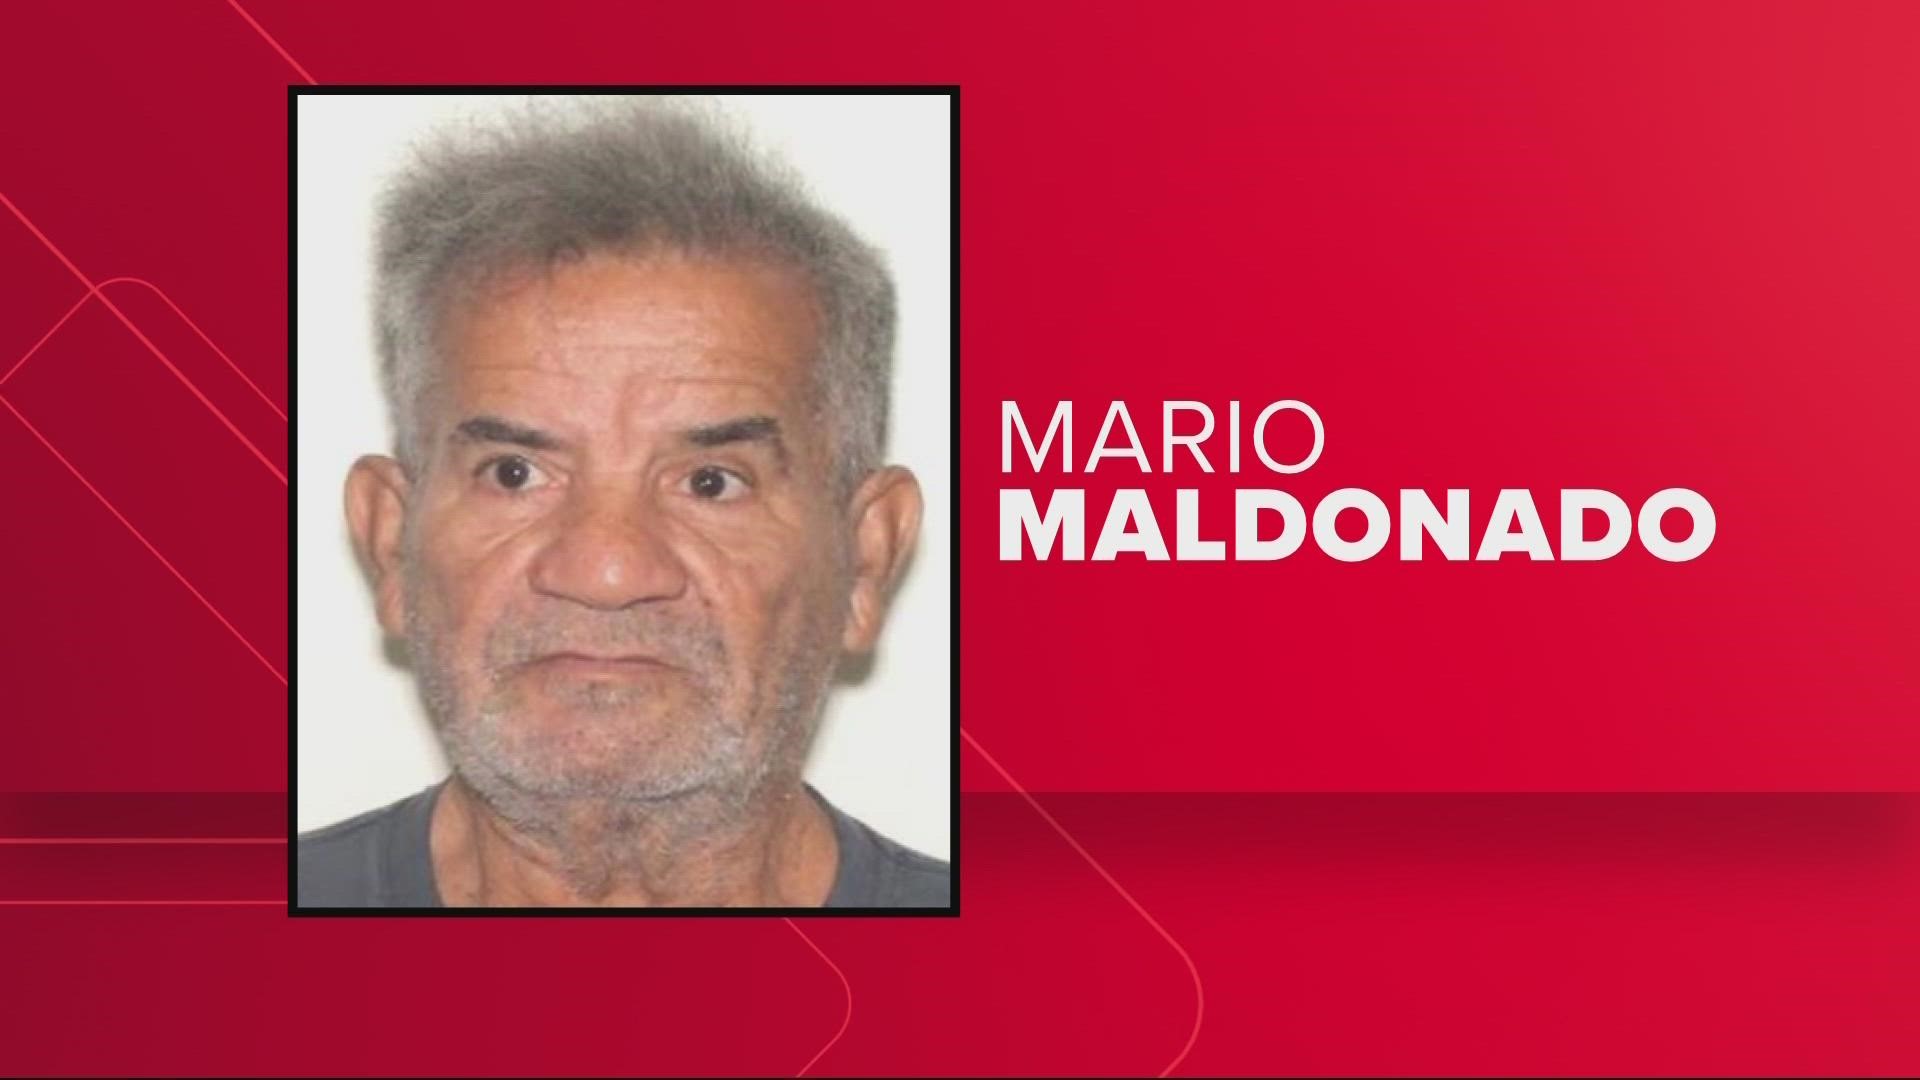 Maldonado was last seen around 6:45 p.m. by family at his residence near Emerson Street and Interstate 95.